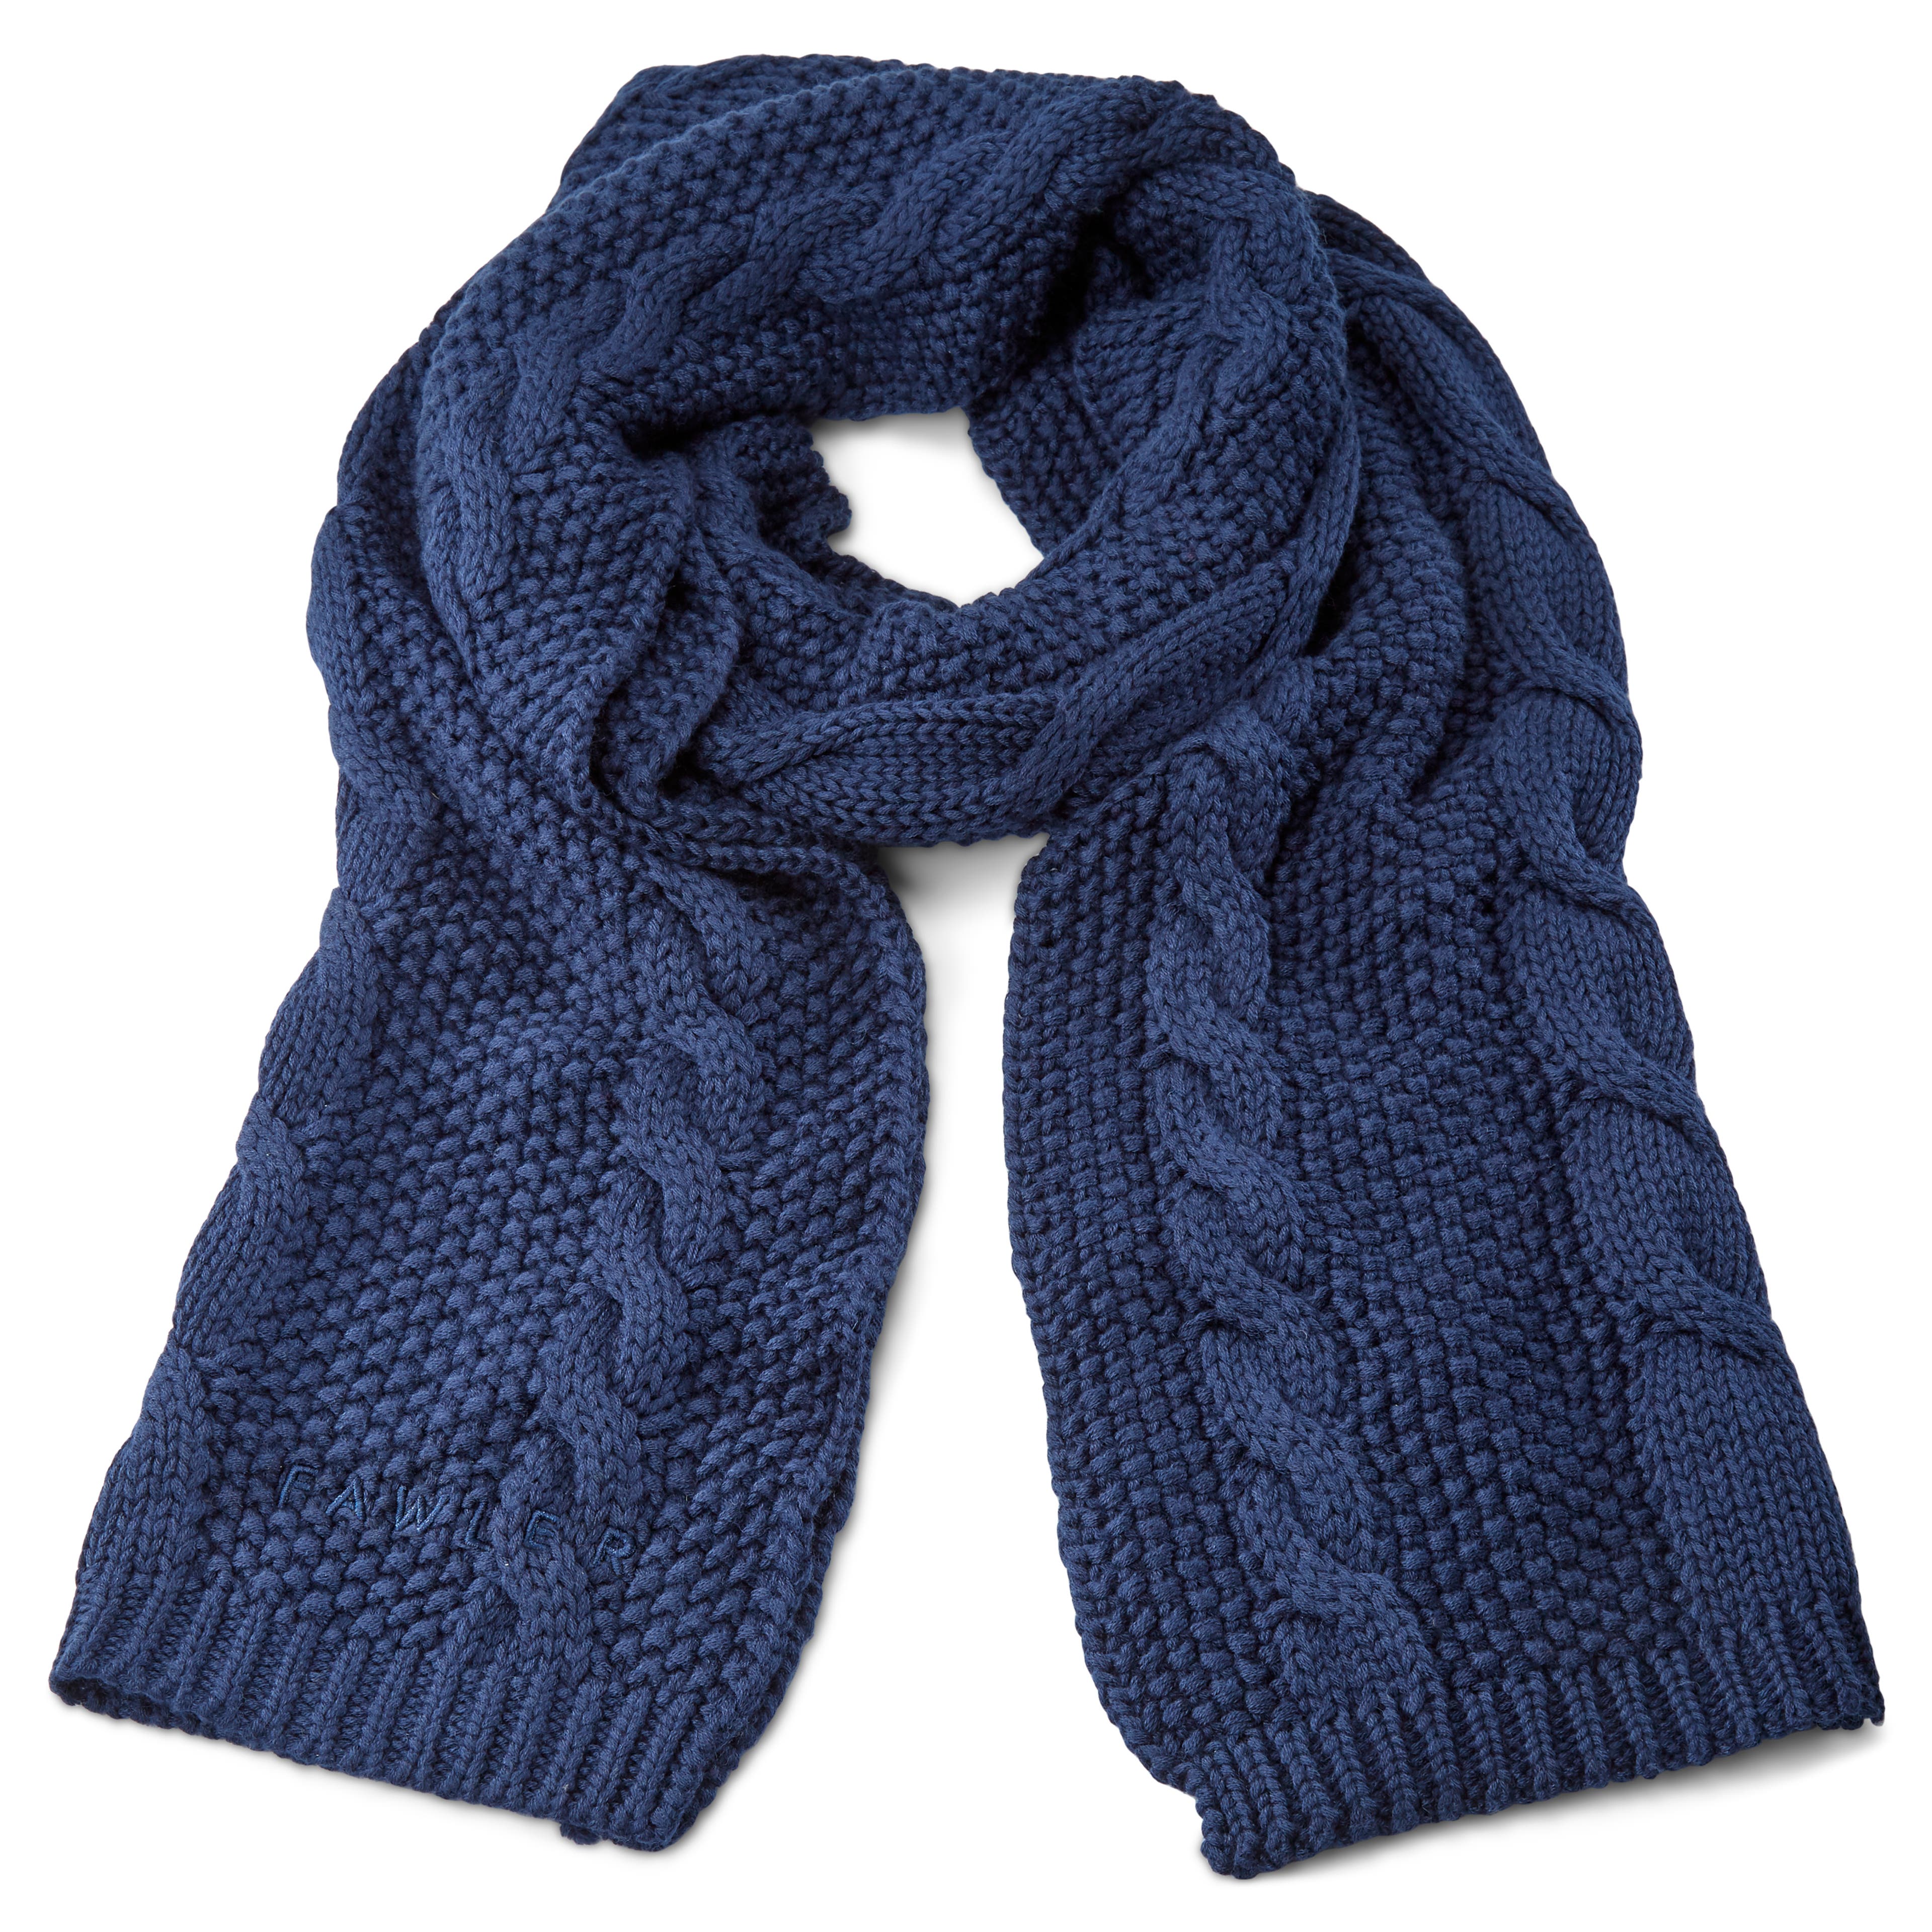 Blue Merino Wool Mix Cable Knitted Scarf